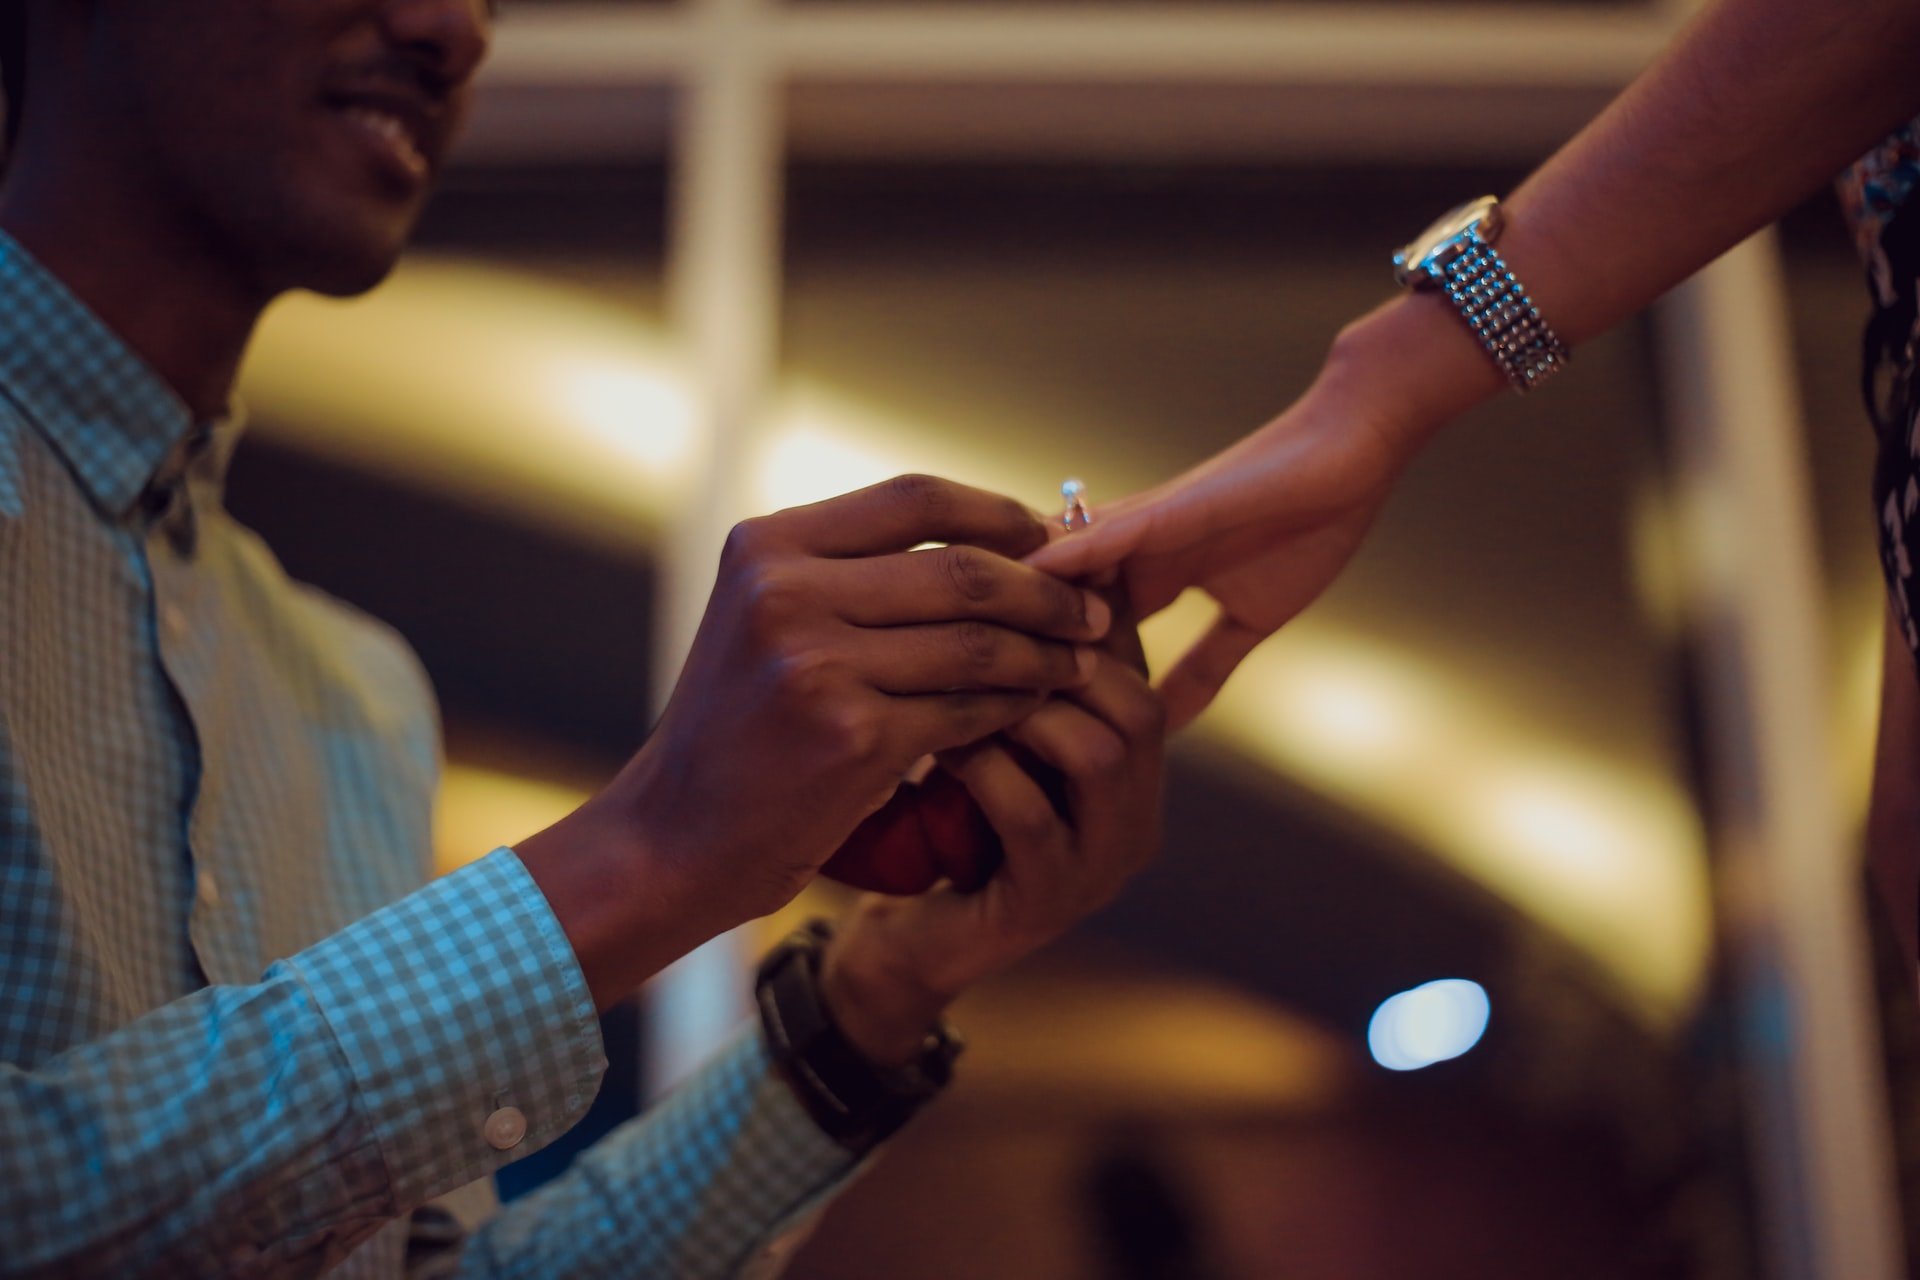 He proposed to his girlfriend the same night he found the ring. | Source: Unsplash